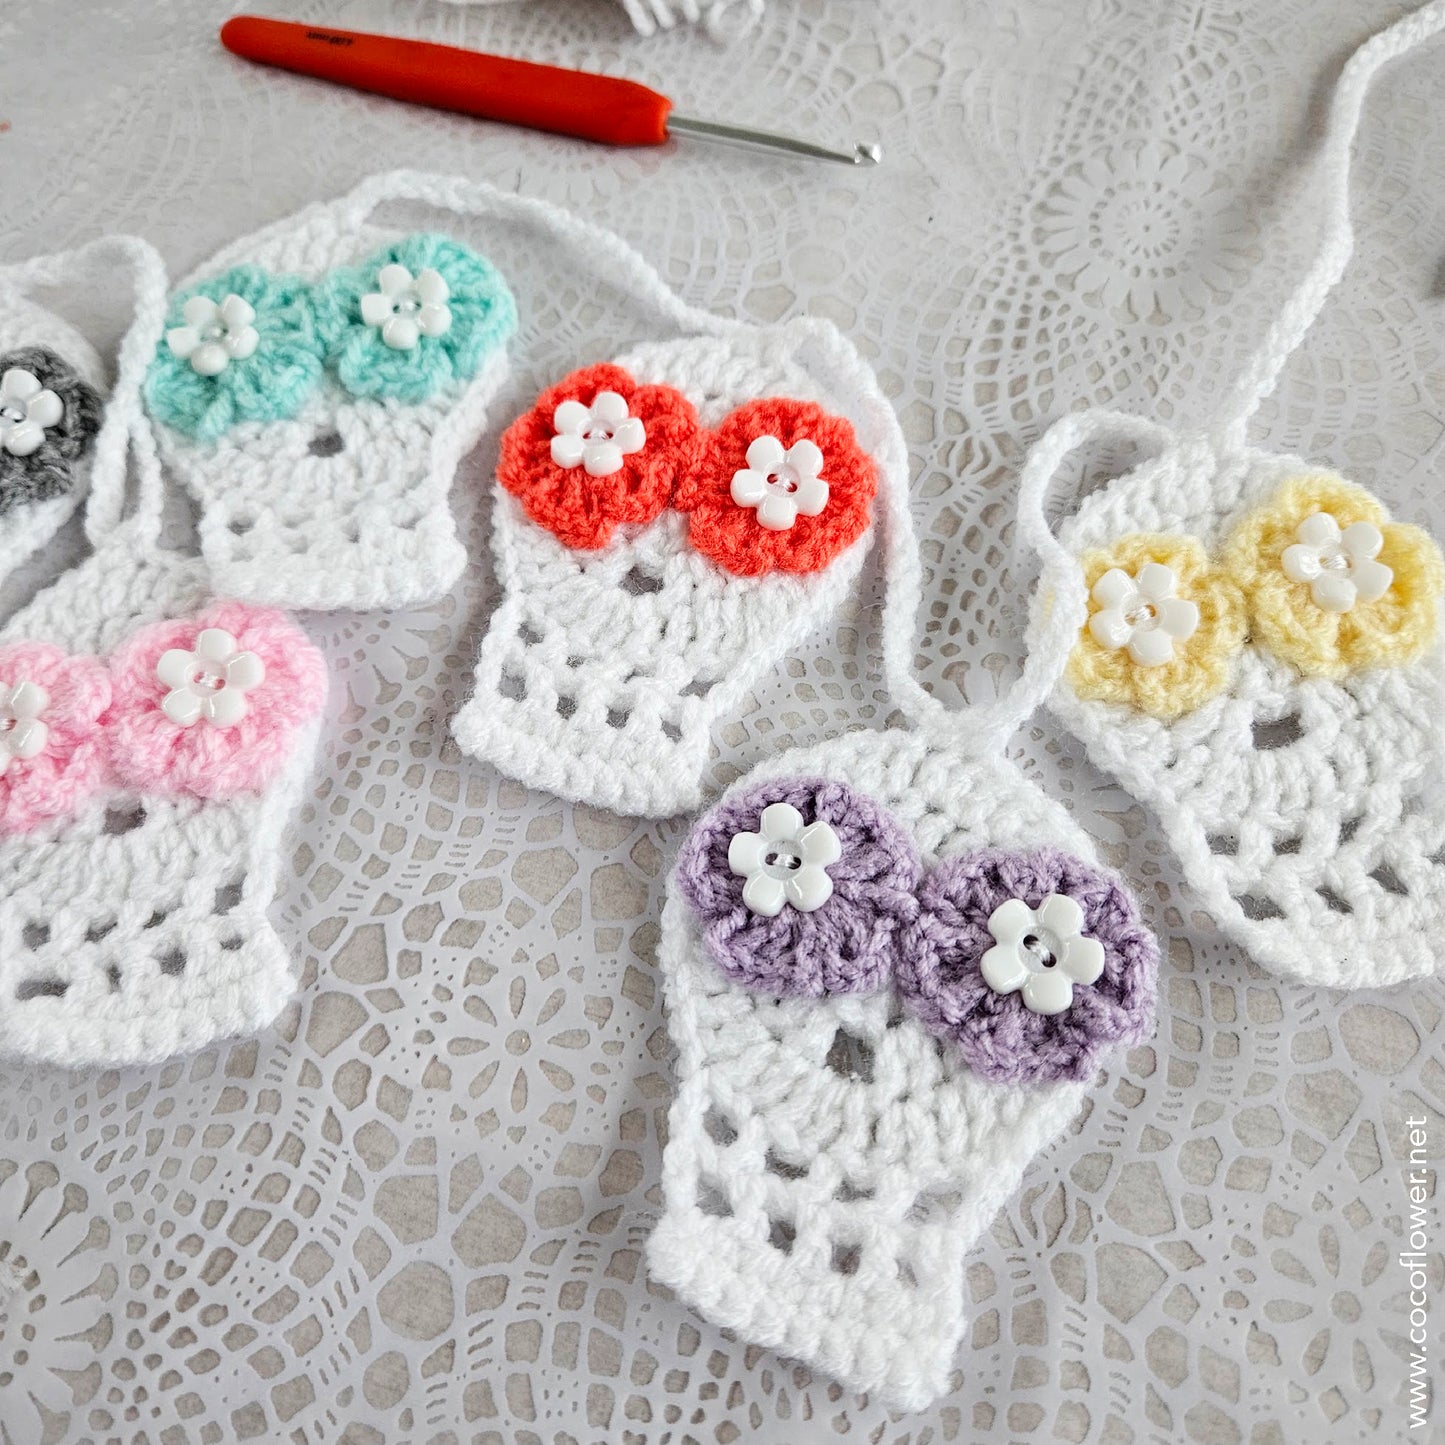 Make a statement with our Sugar Skull Garland, a handmade crochet creation that exudes rock chic charm.